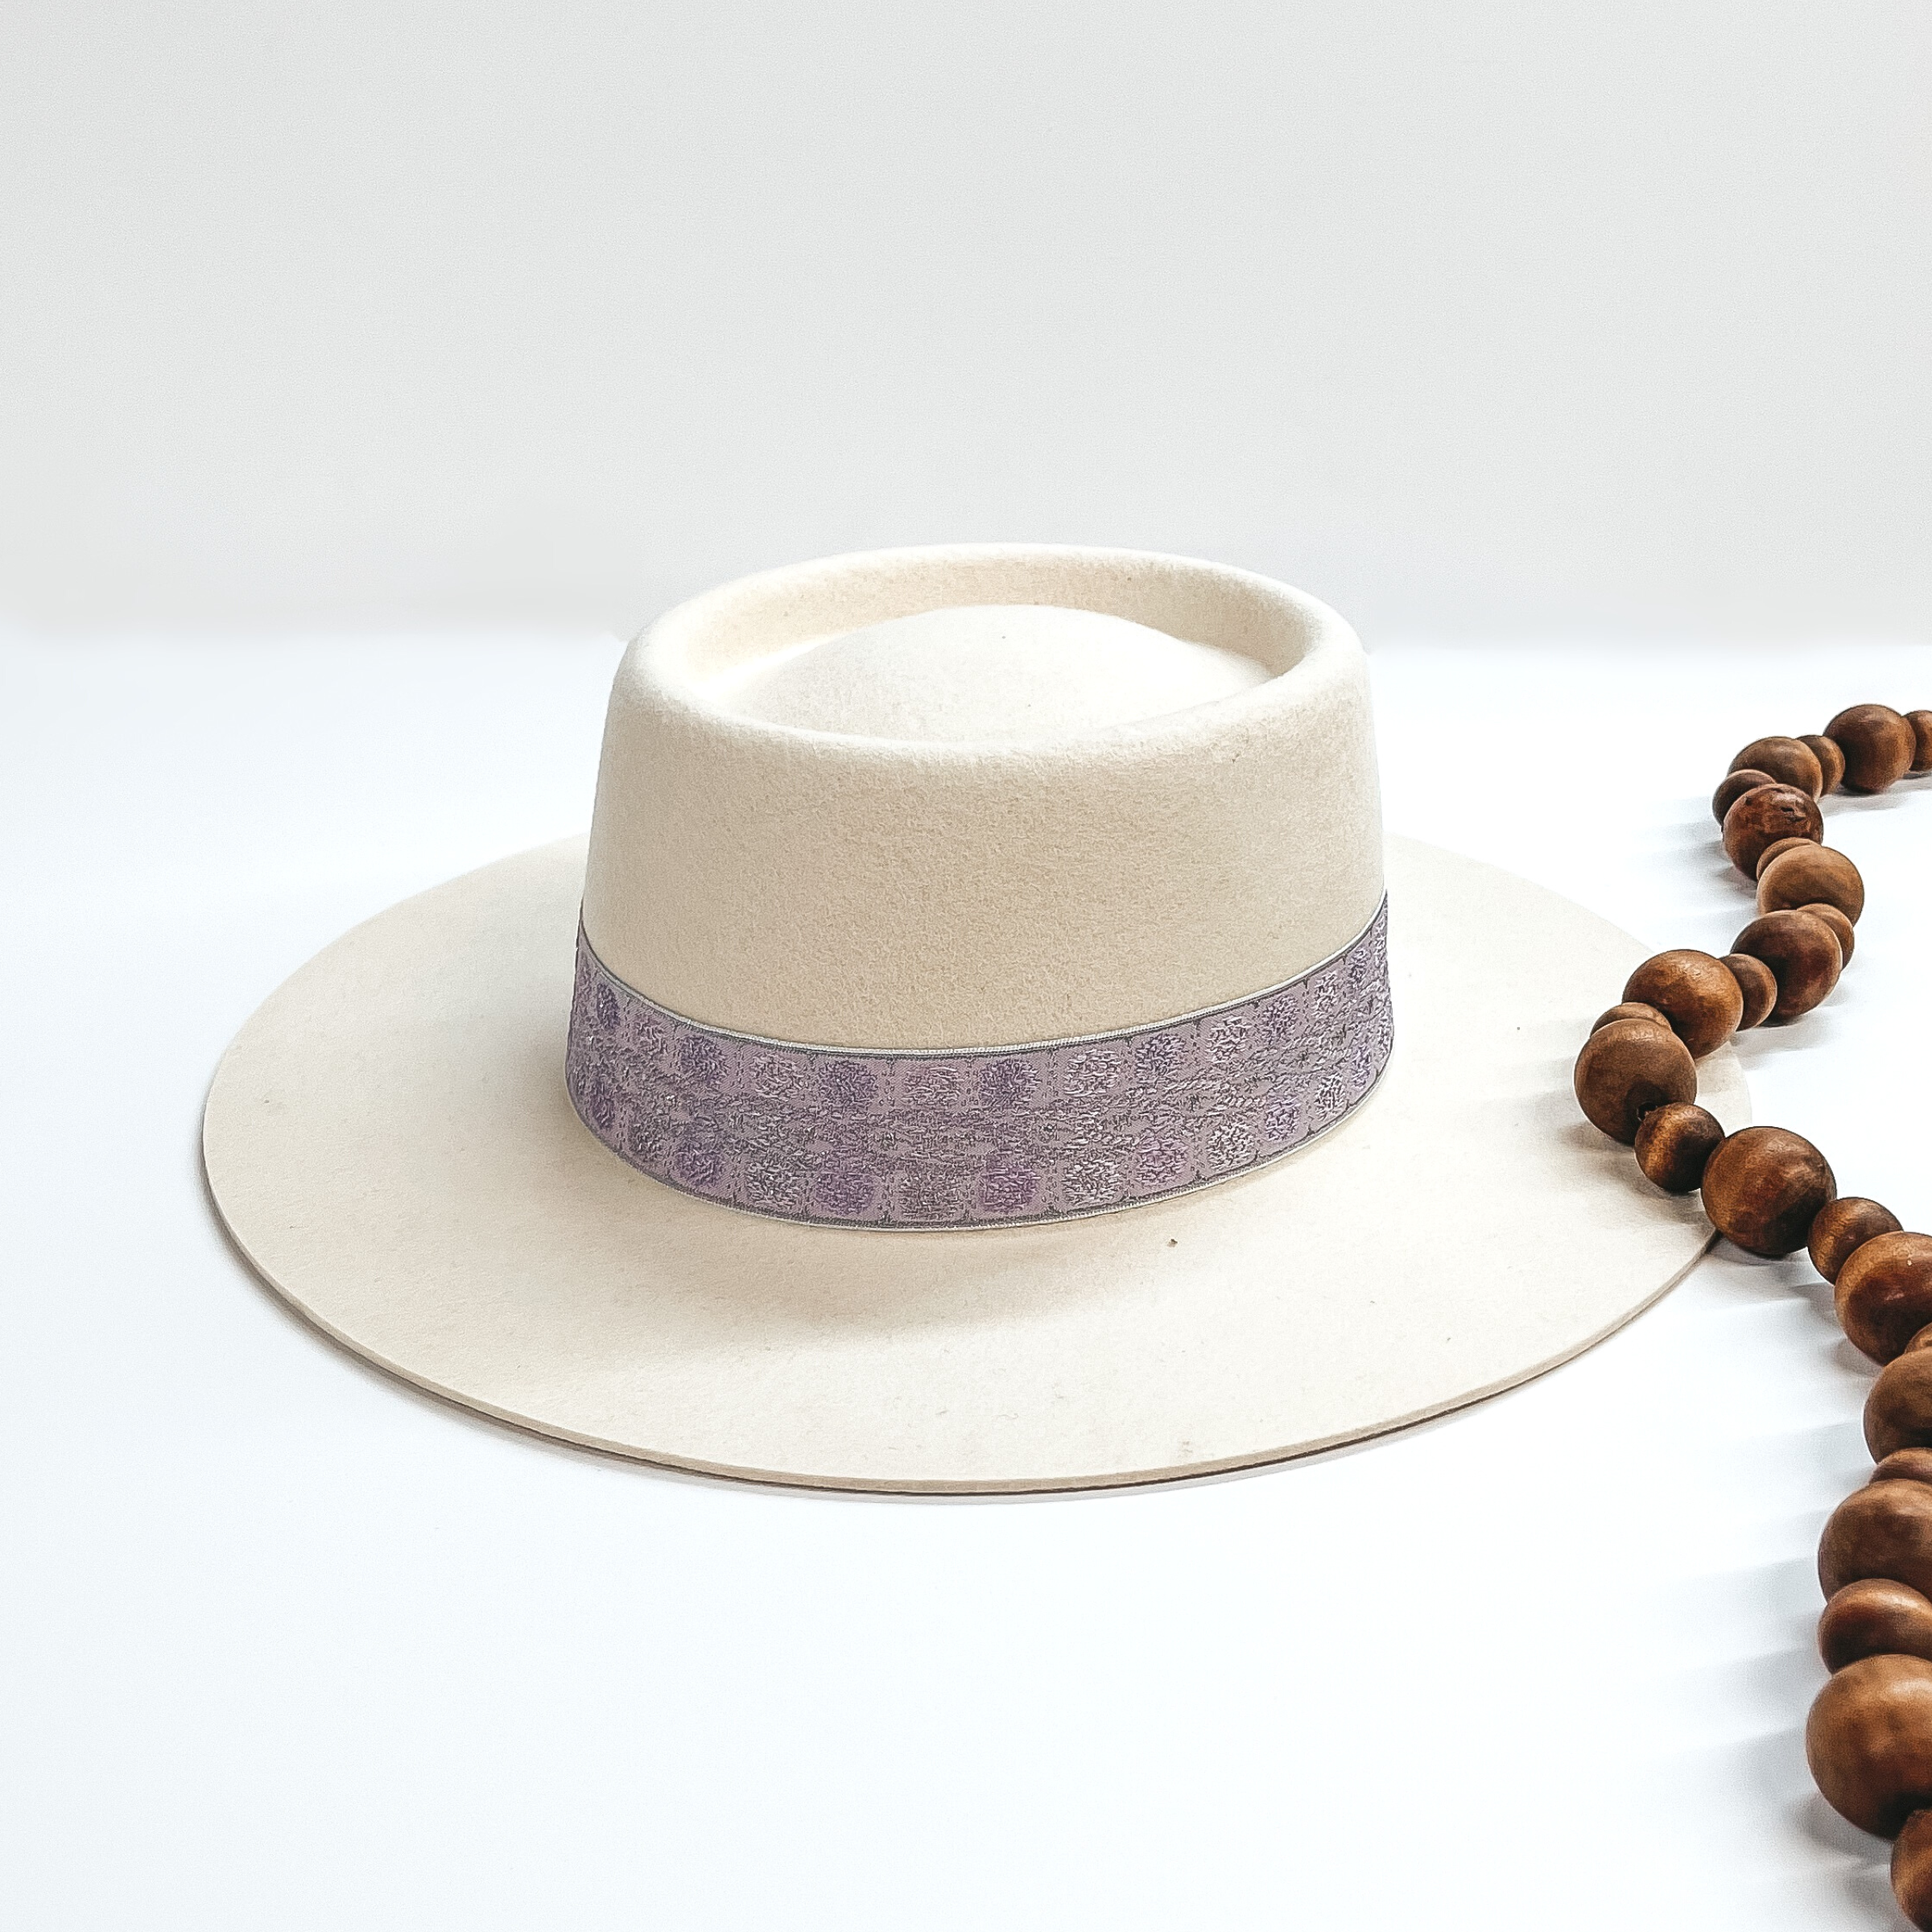 Ivory felt hat with an oval crown and flat brim. This hat also has a light purple lace hat band. This hat is pictured on a white background with brown decorative beads. 